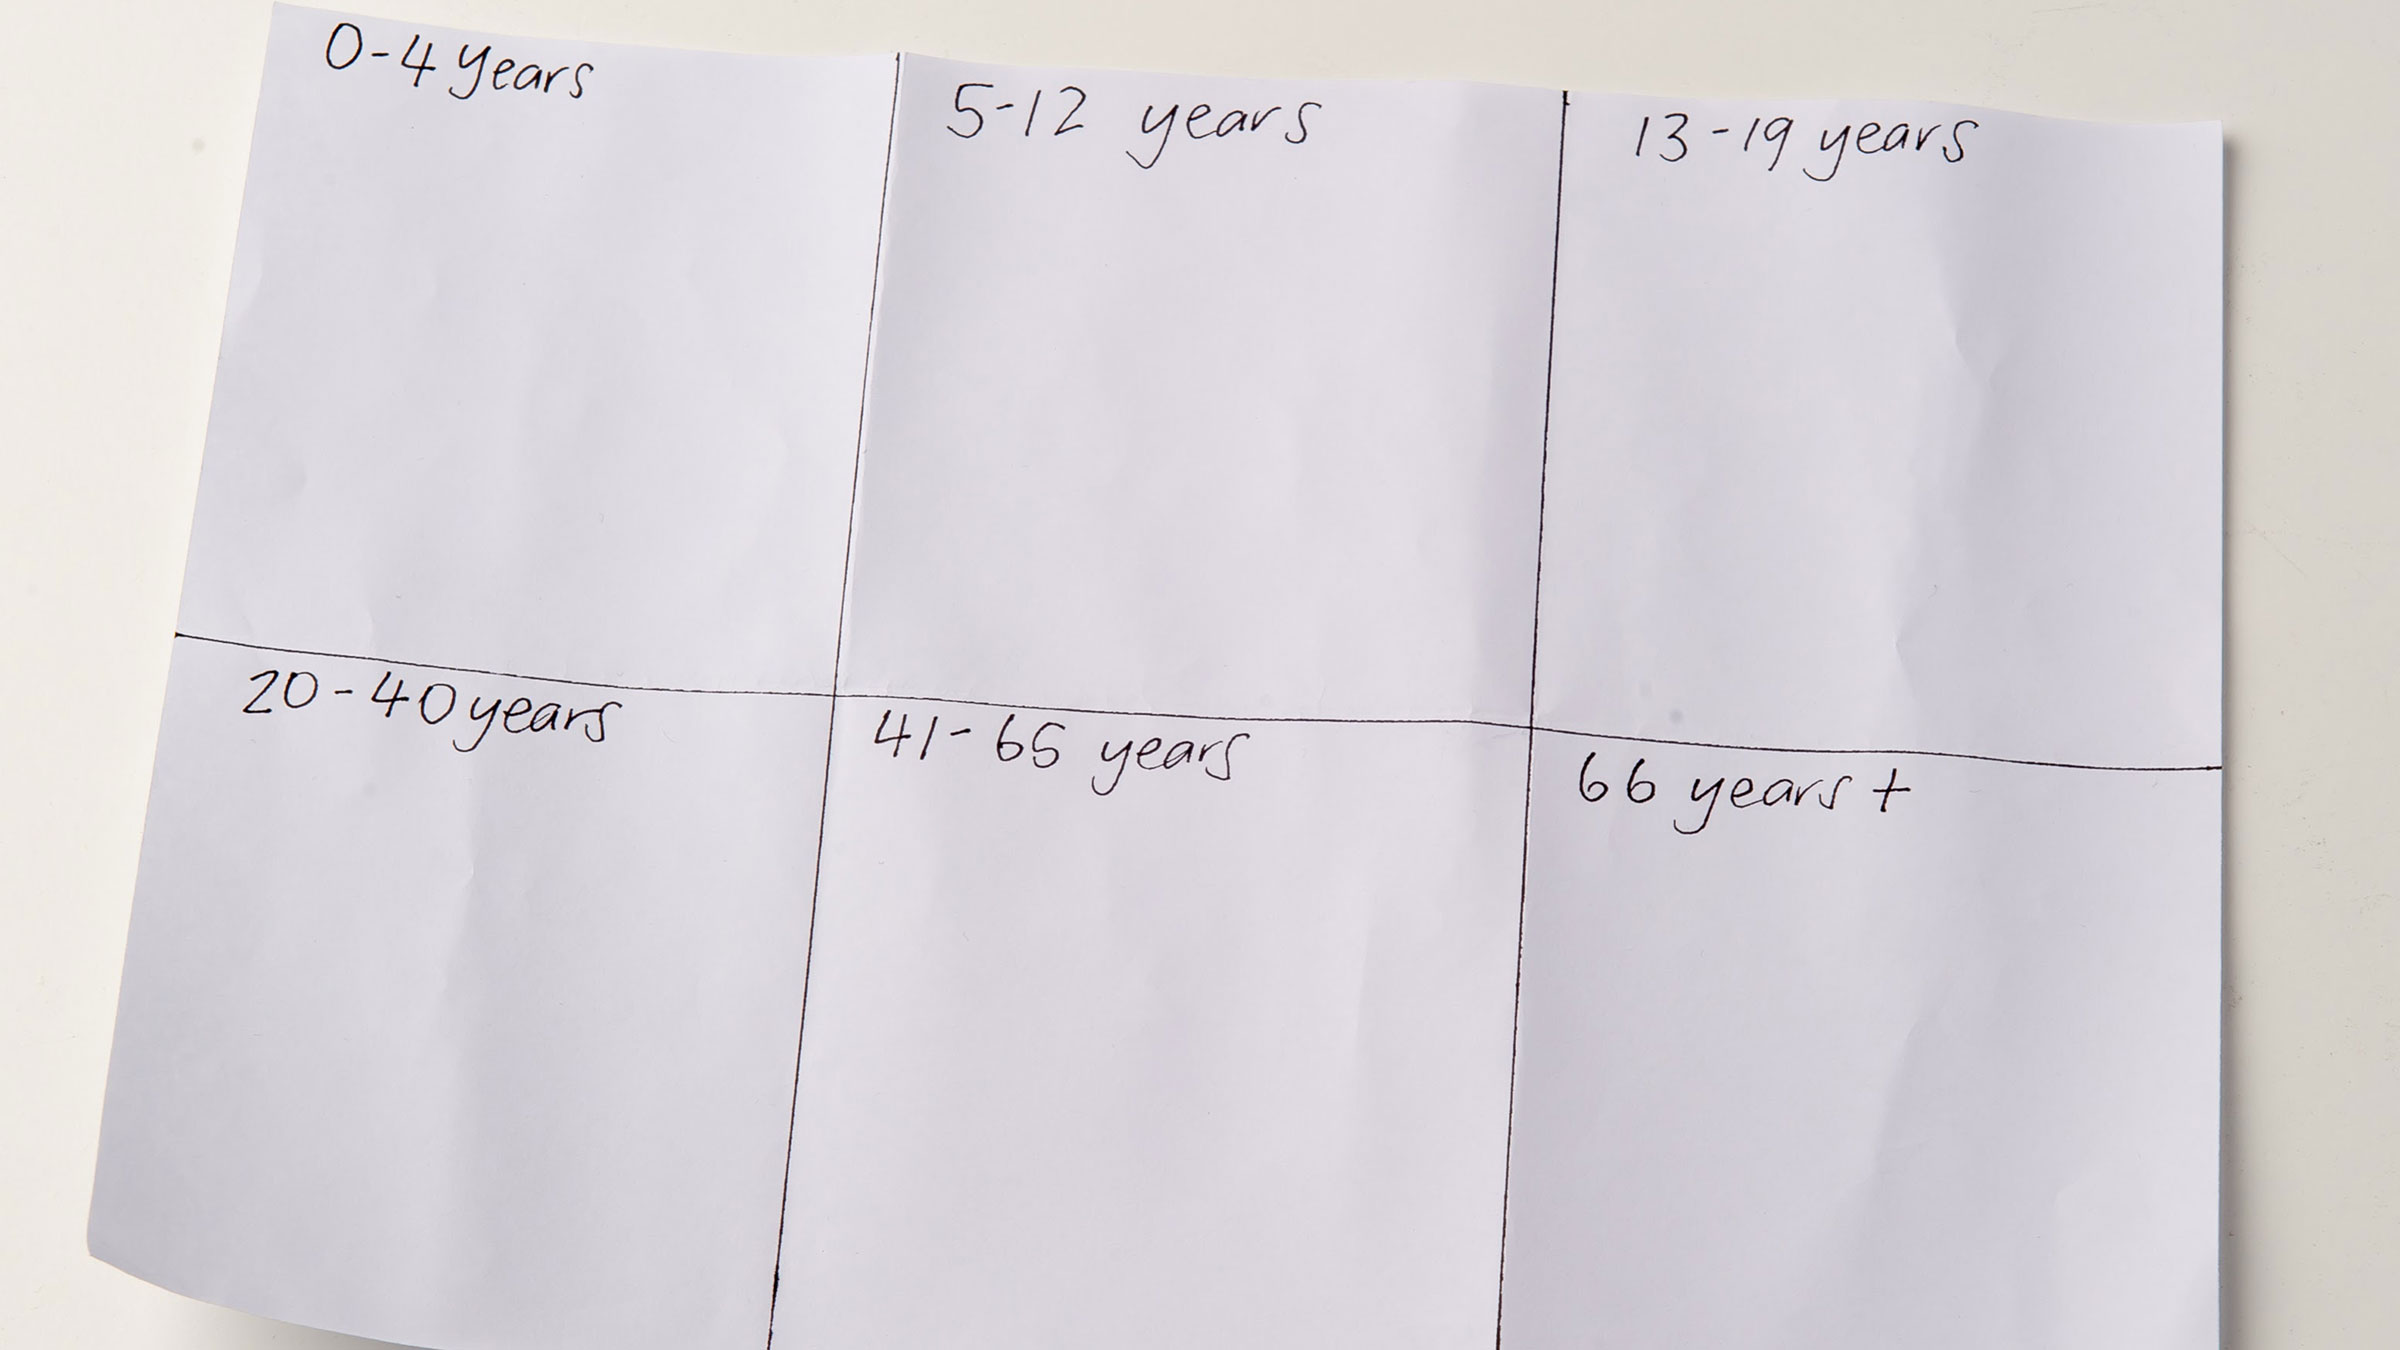 A sheet of paper labelled with age groups.